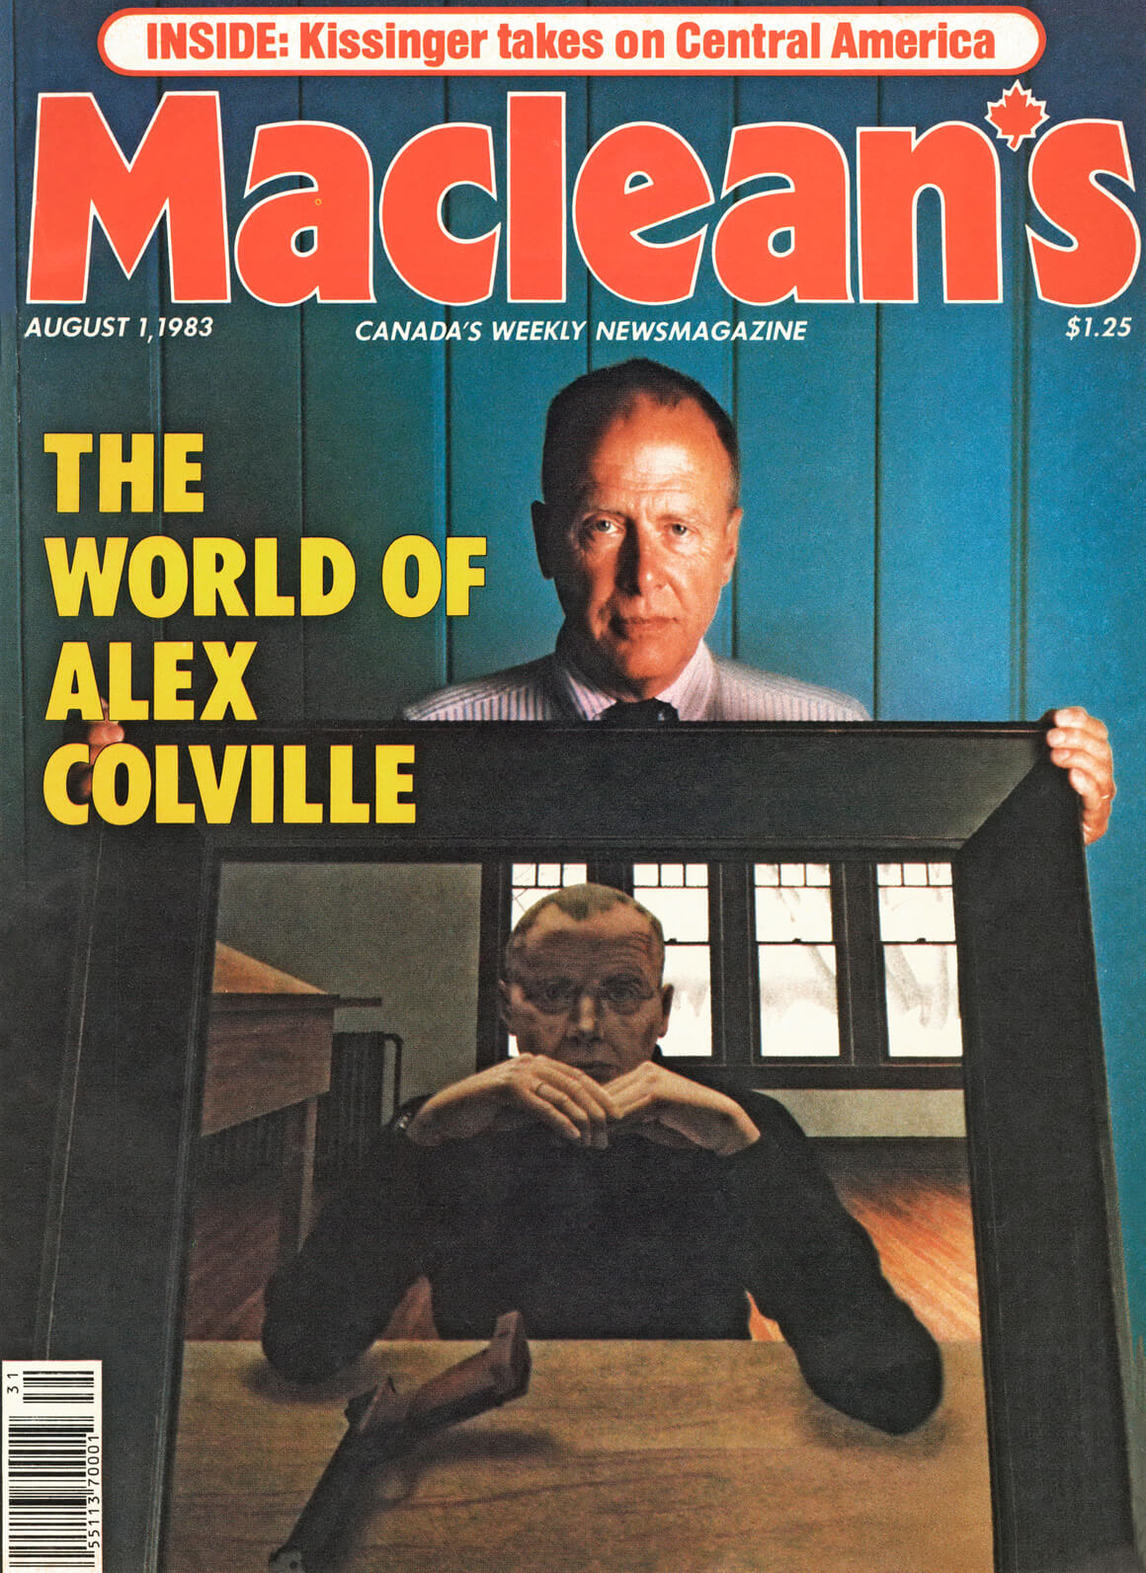 Art Canada Institute, Alex Colville, Cover of Maclean’s magazine featuring “The World of Alex Colville,” August 1, 1983